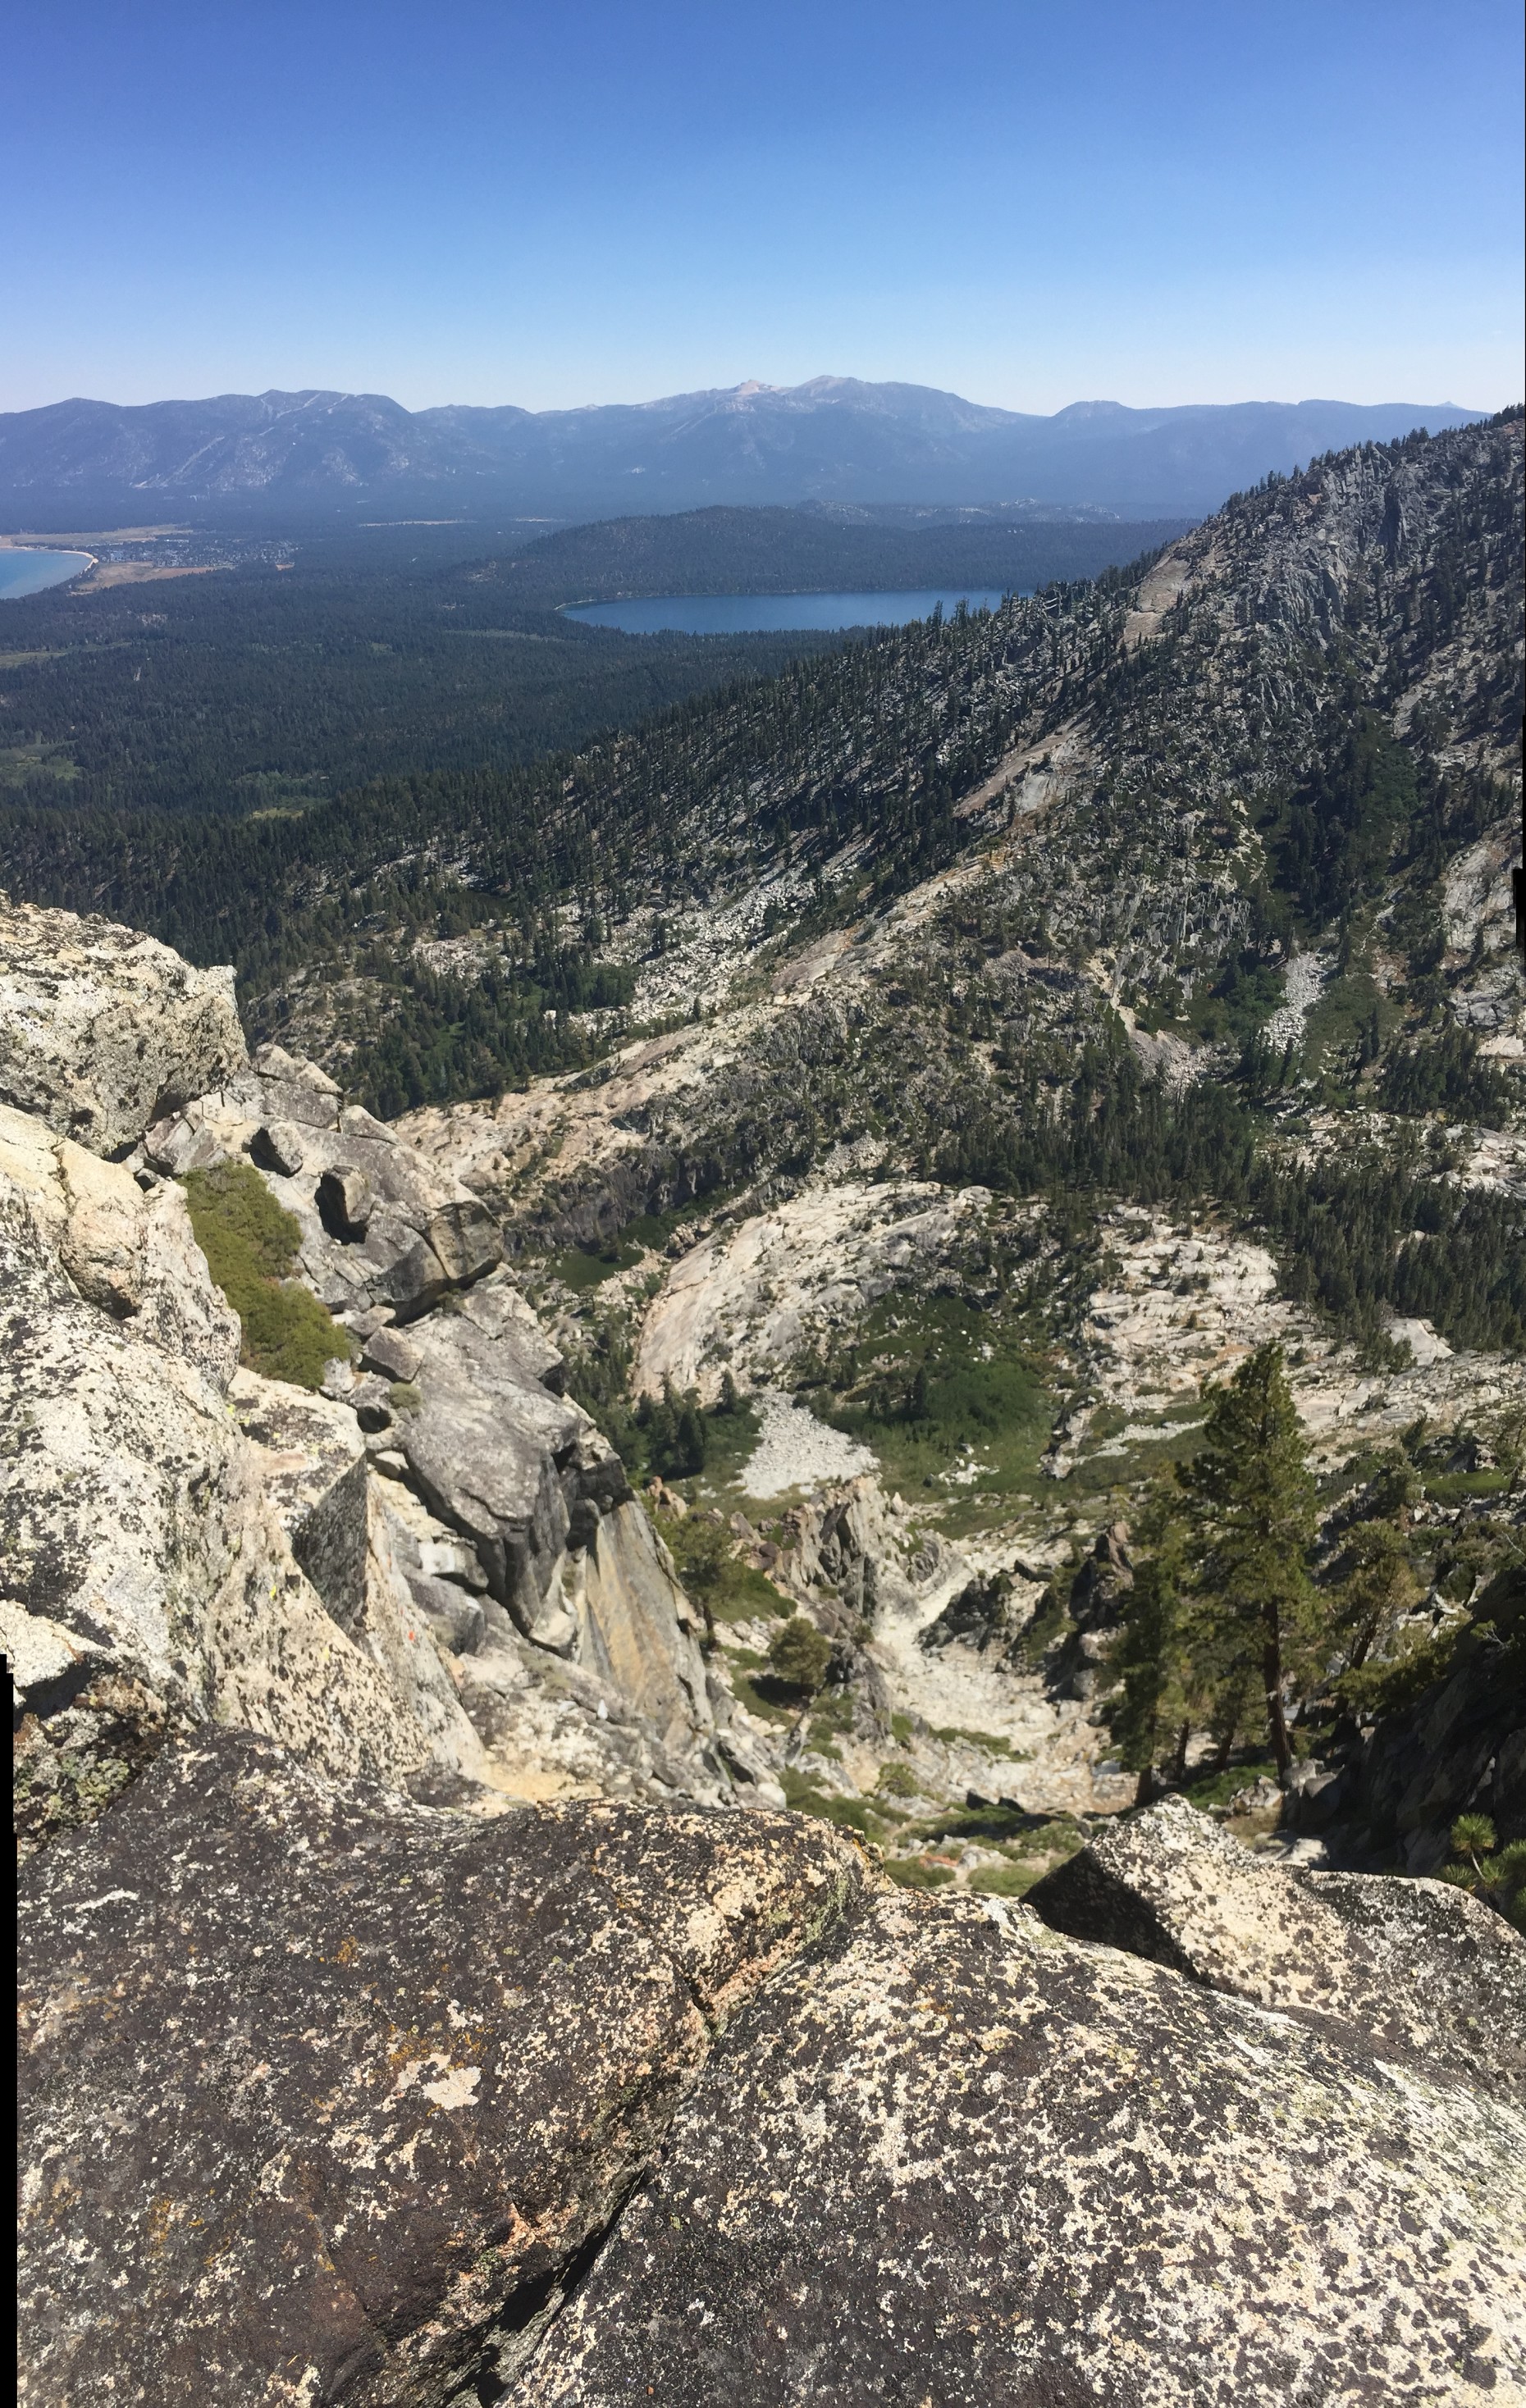 The rocky mountain terrain as seen from Maggie's Peak north. 8/25/2016 Lake Tahoe